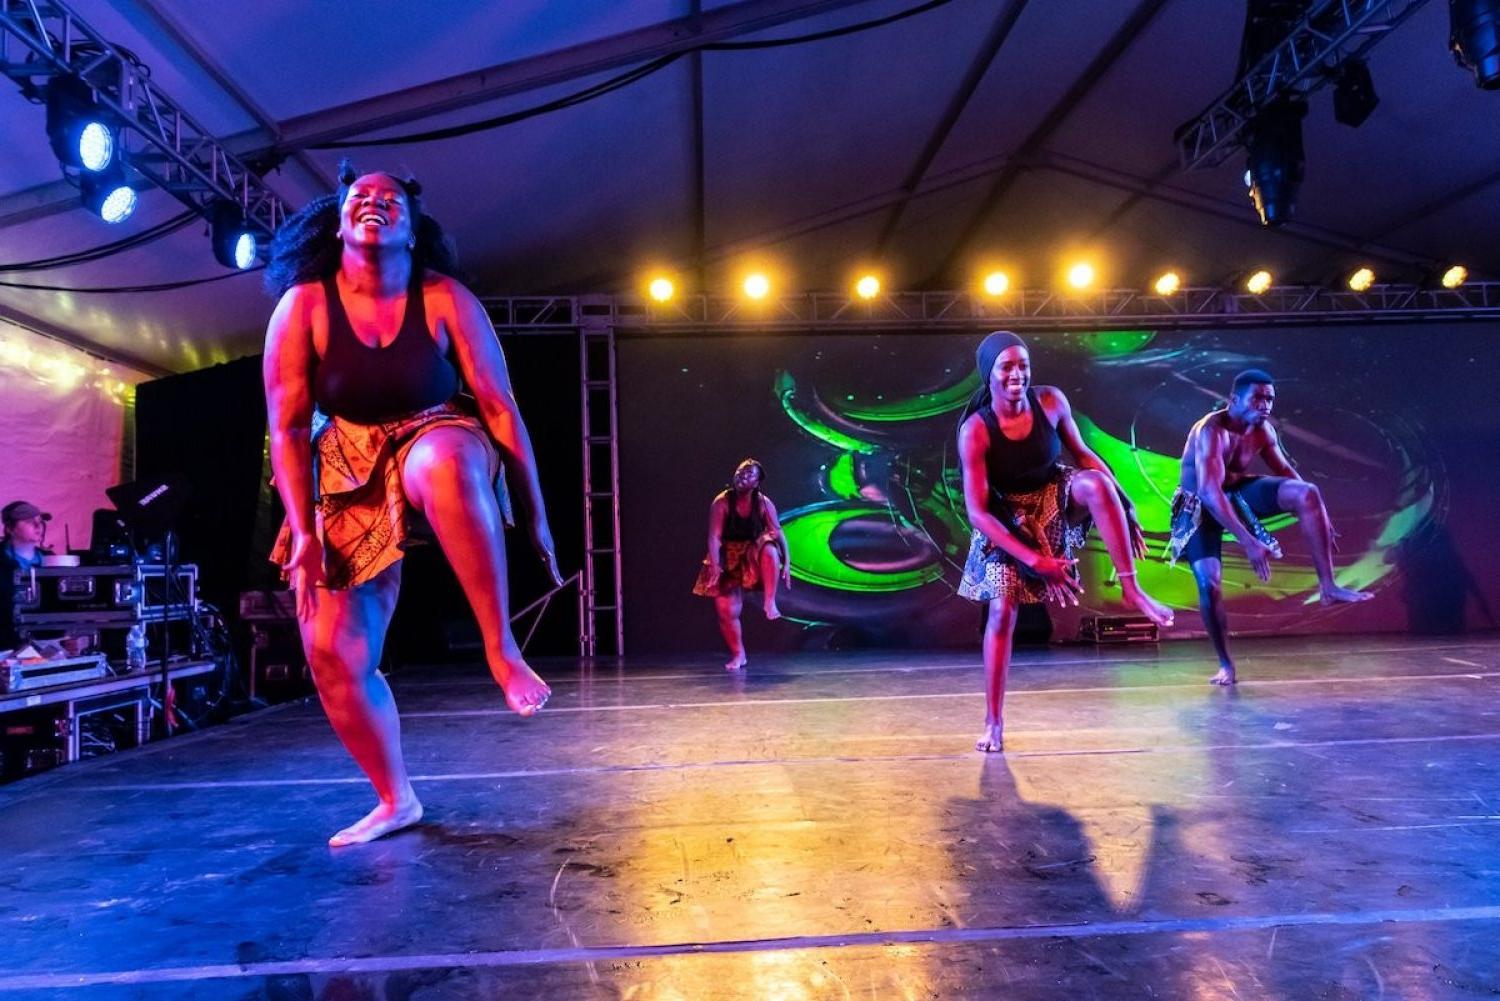 A group of dancers on stage